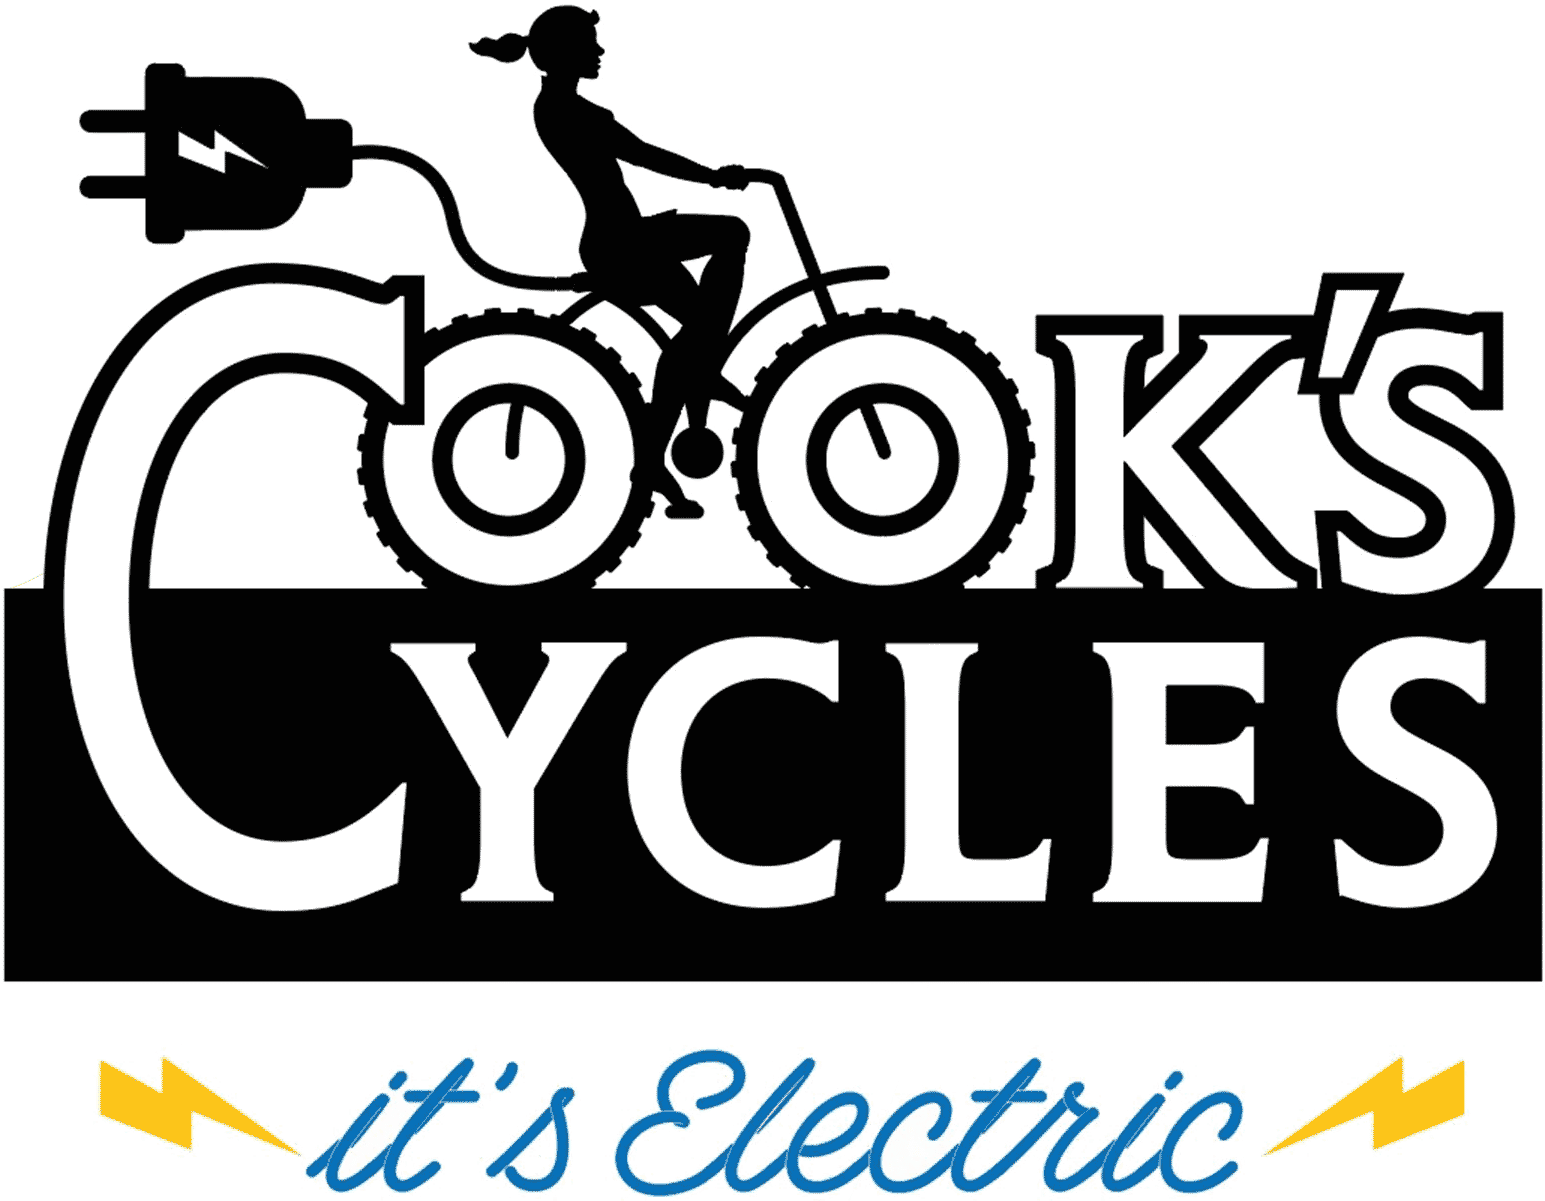 Cook's Cycles - Nantucket, MA